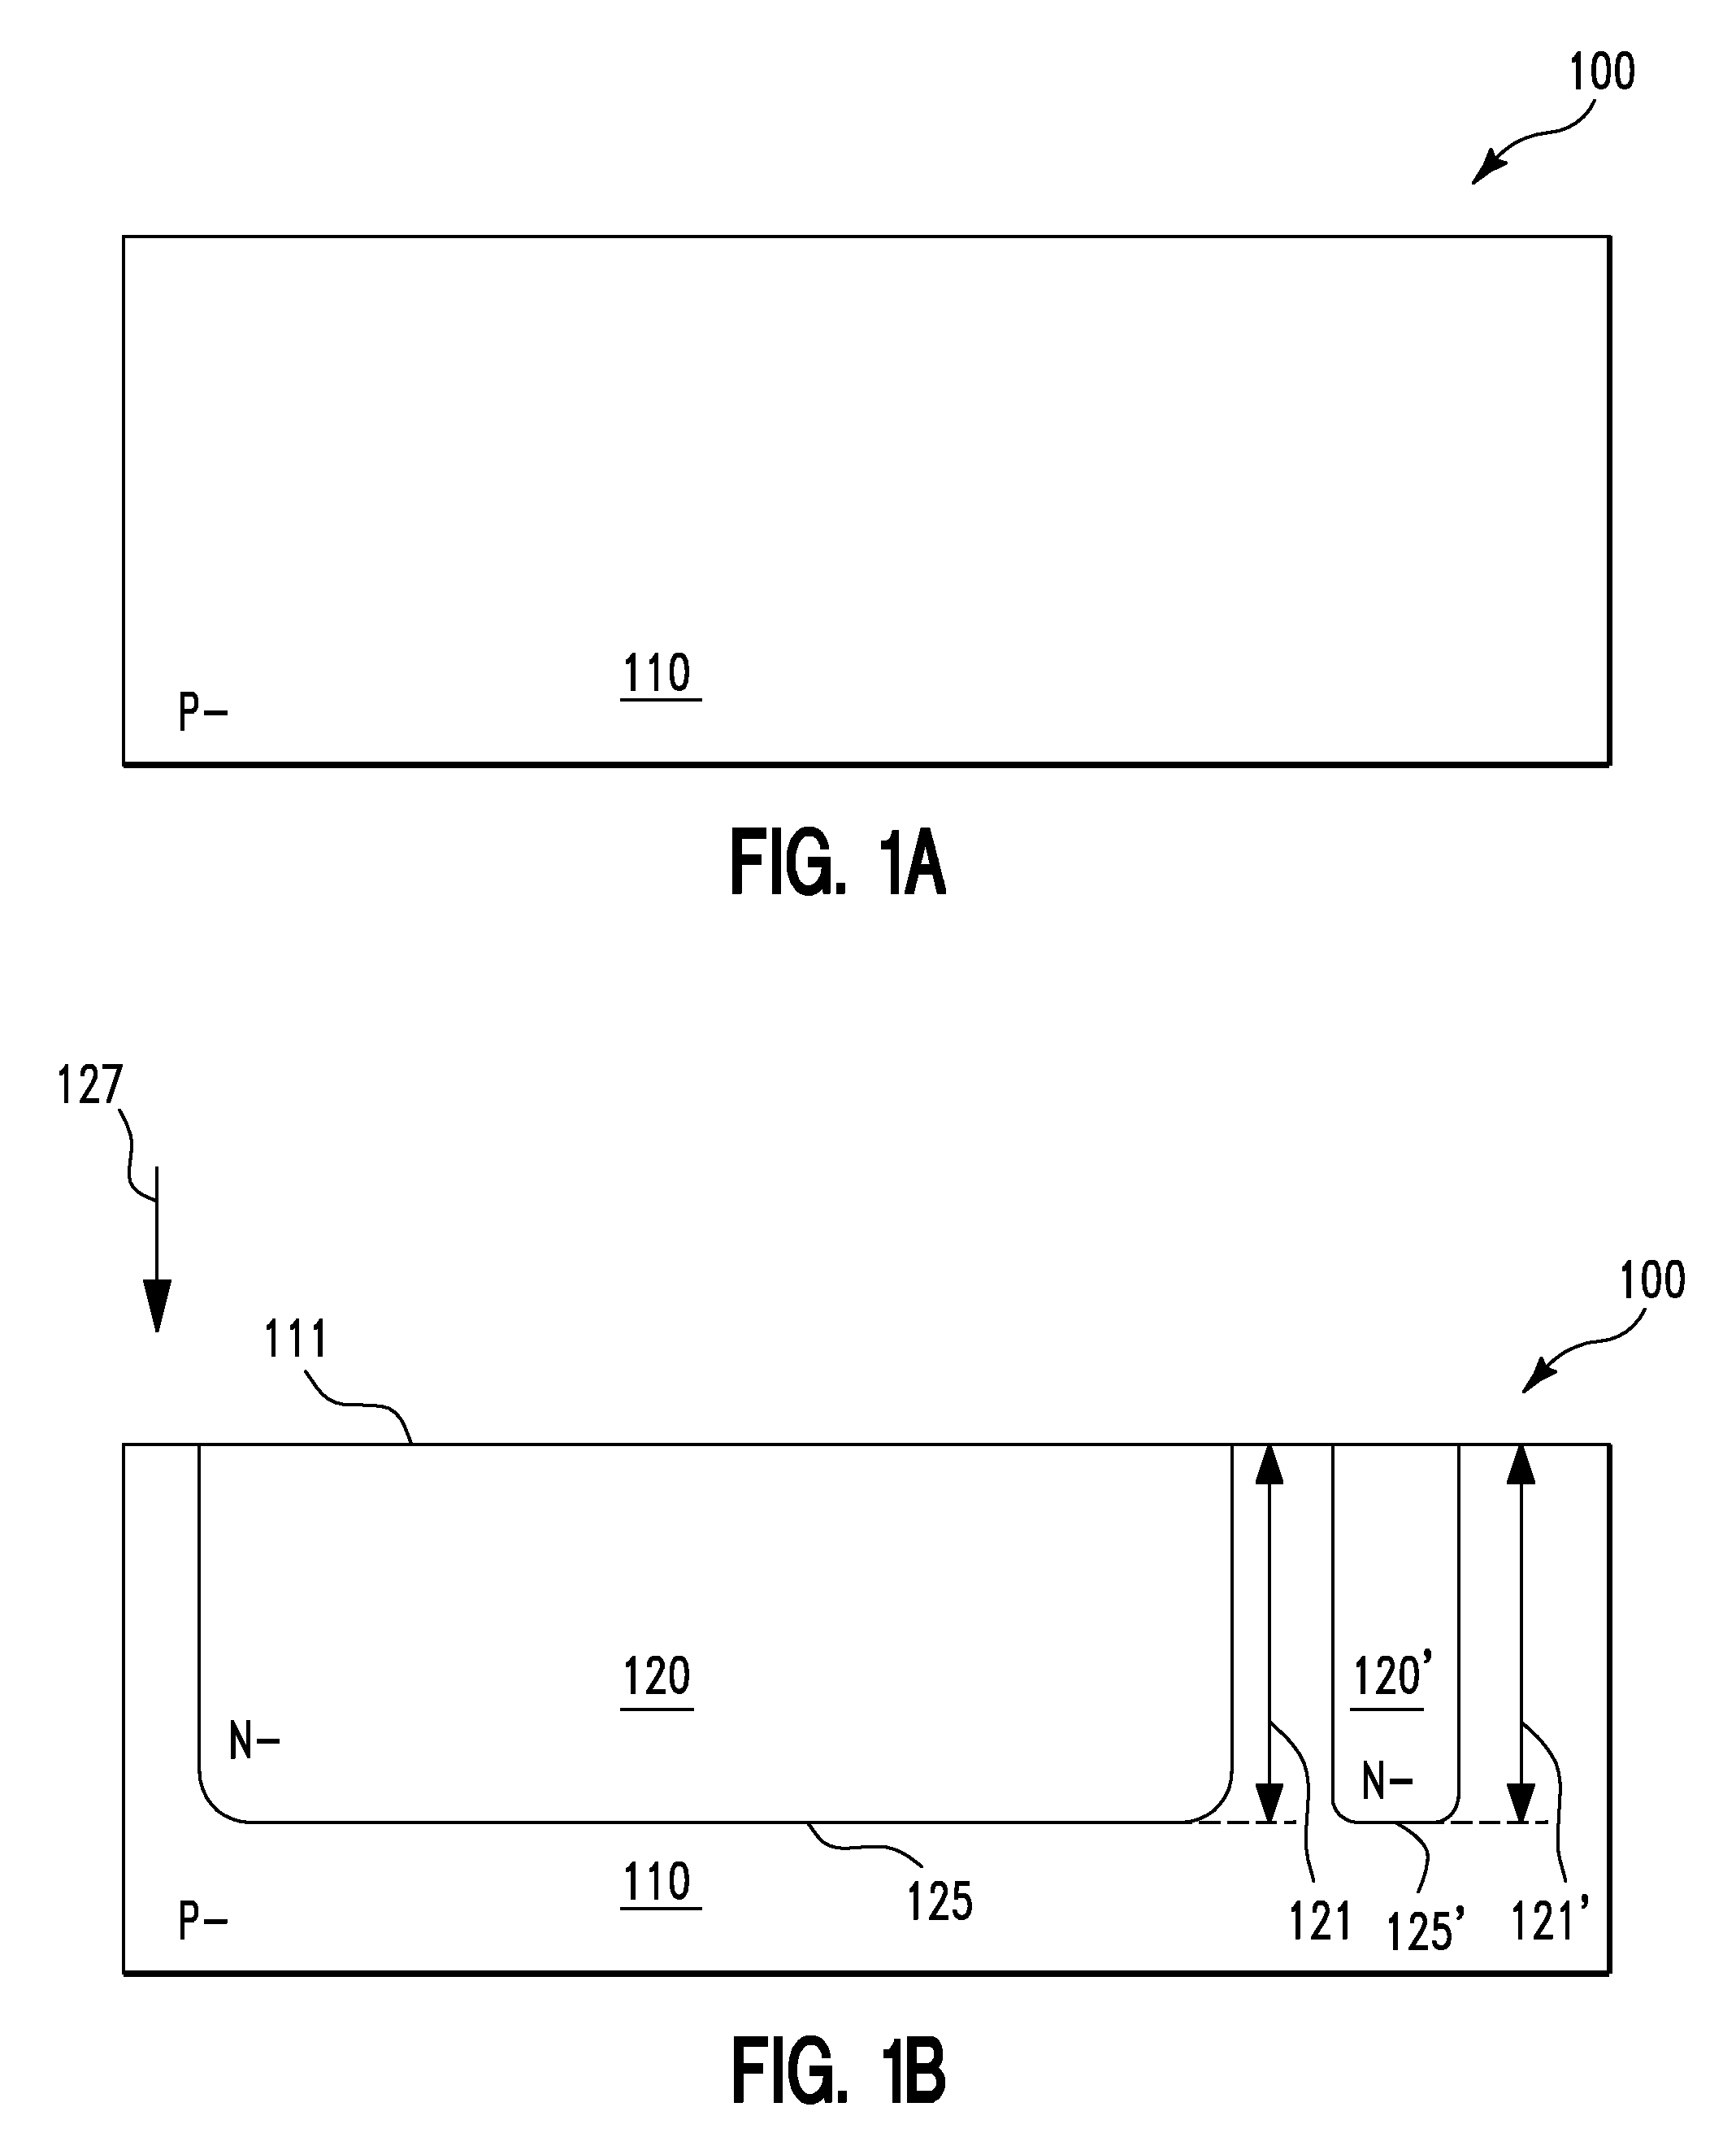 Guard ring structures for high voltage  CMOS/low voltage CMOS technology using ldmos (lateral double-diffused metal oxide semiconductor) device fabrication